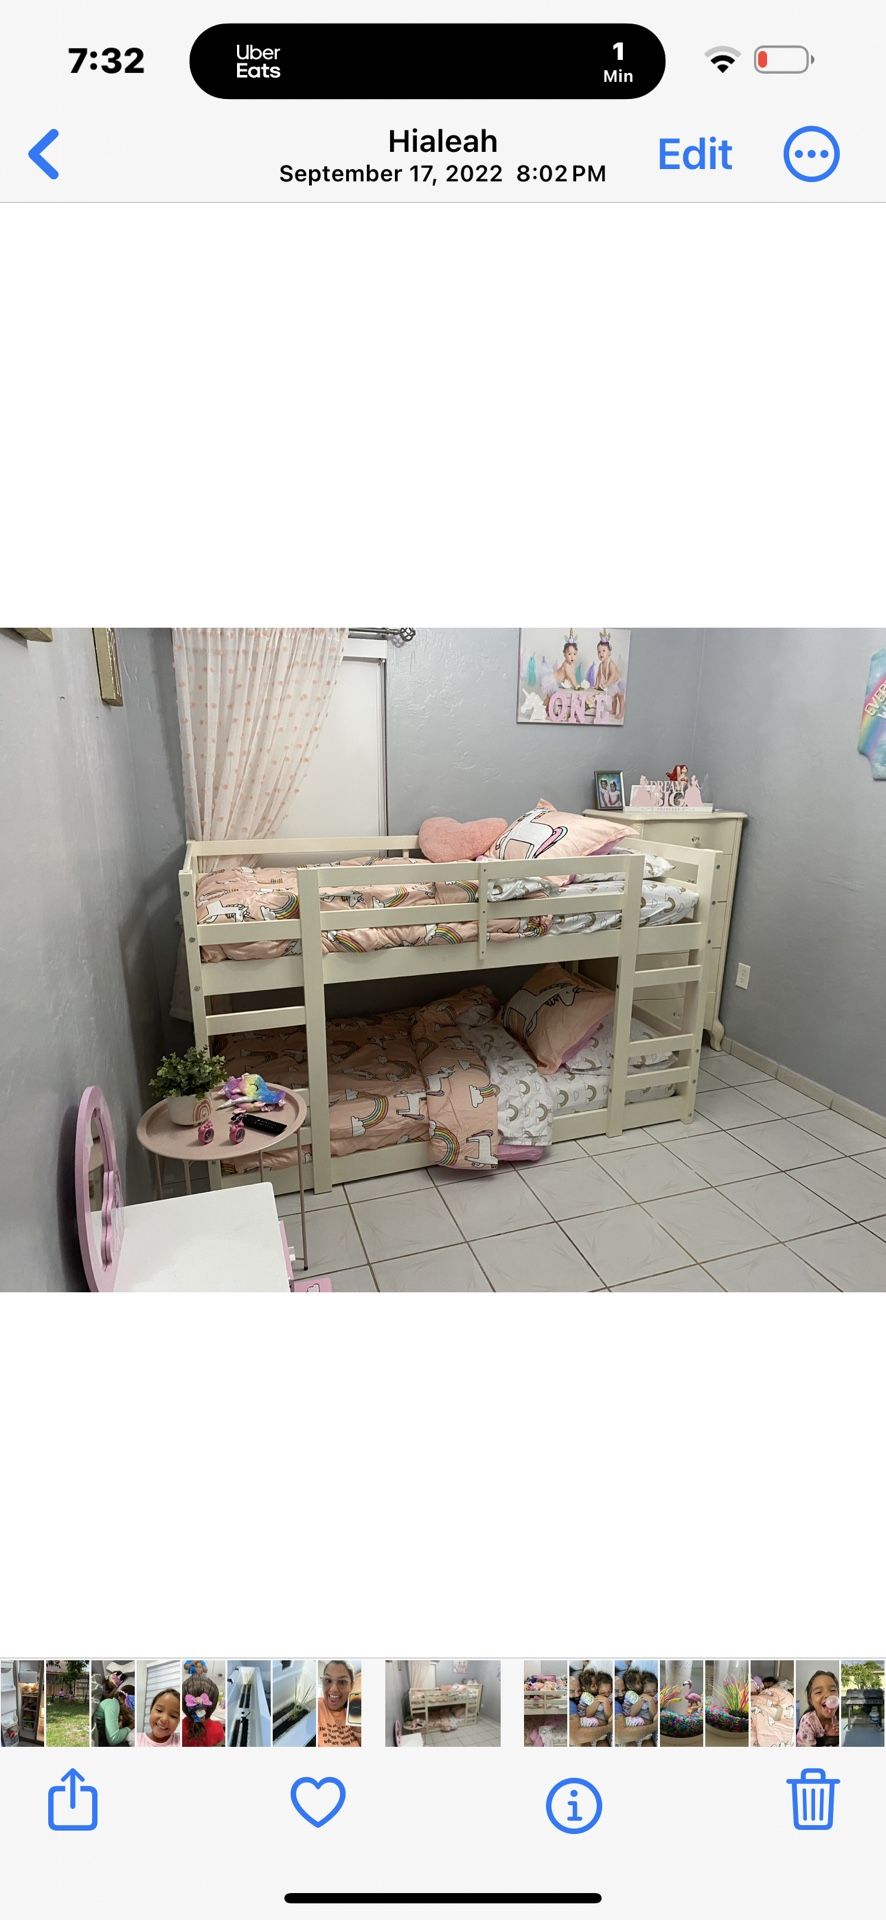 Ivory Bunk Bed 